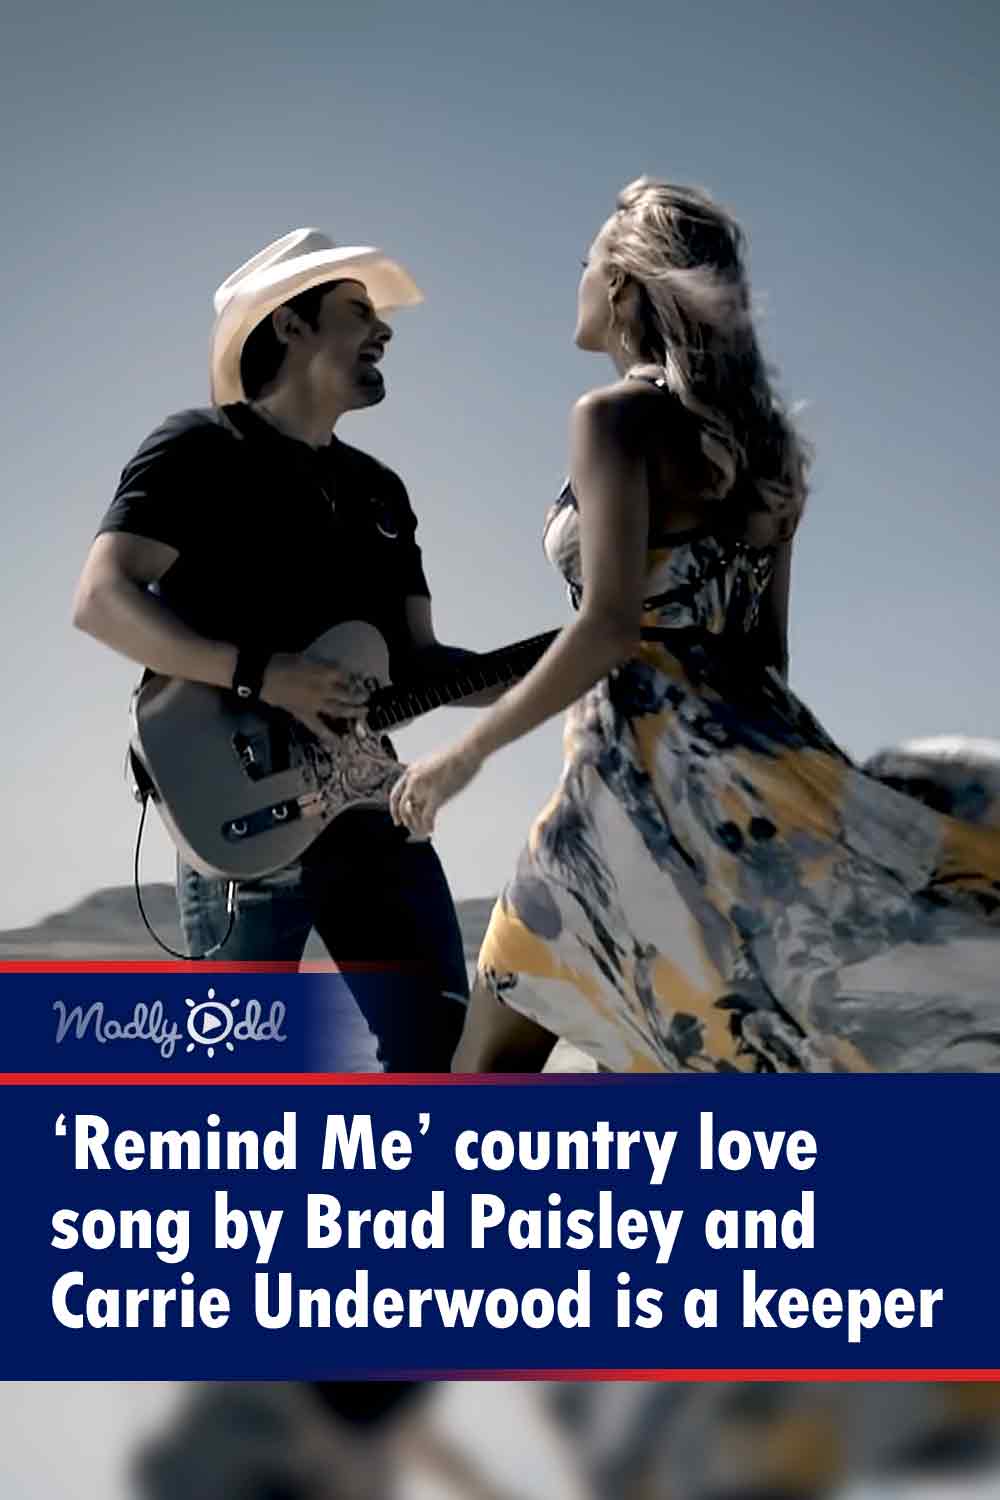 ‘Remind Me’ country love song by Brad Paisley and Carrie Underwood is a keeper